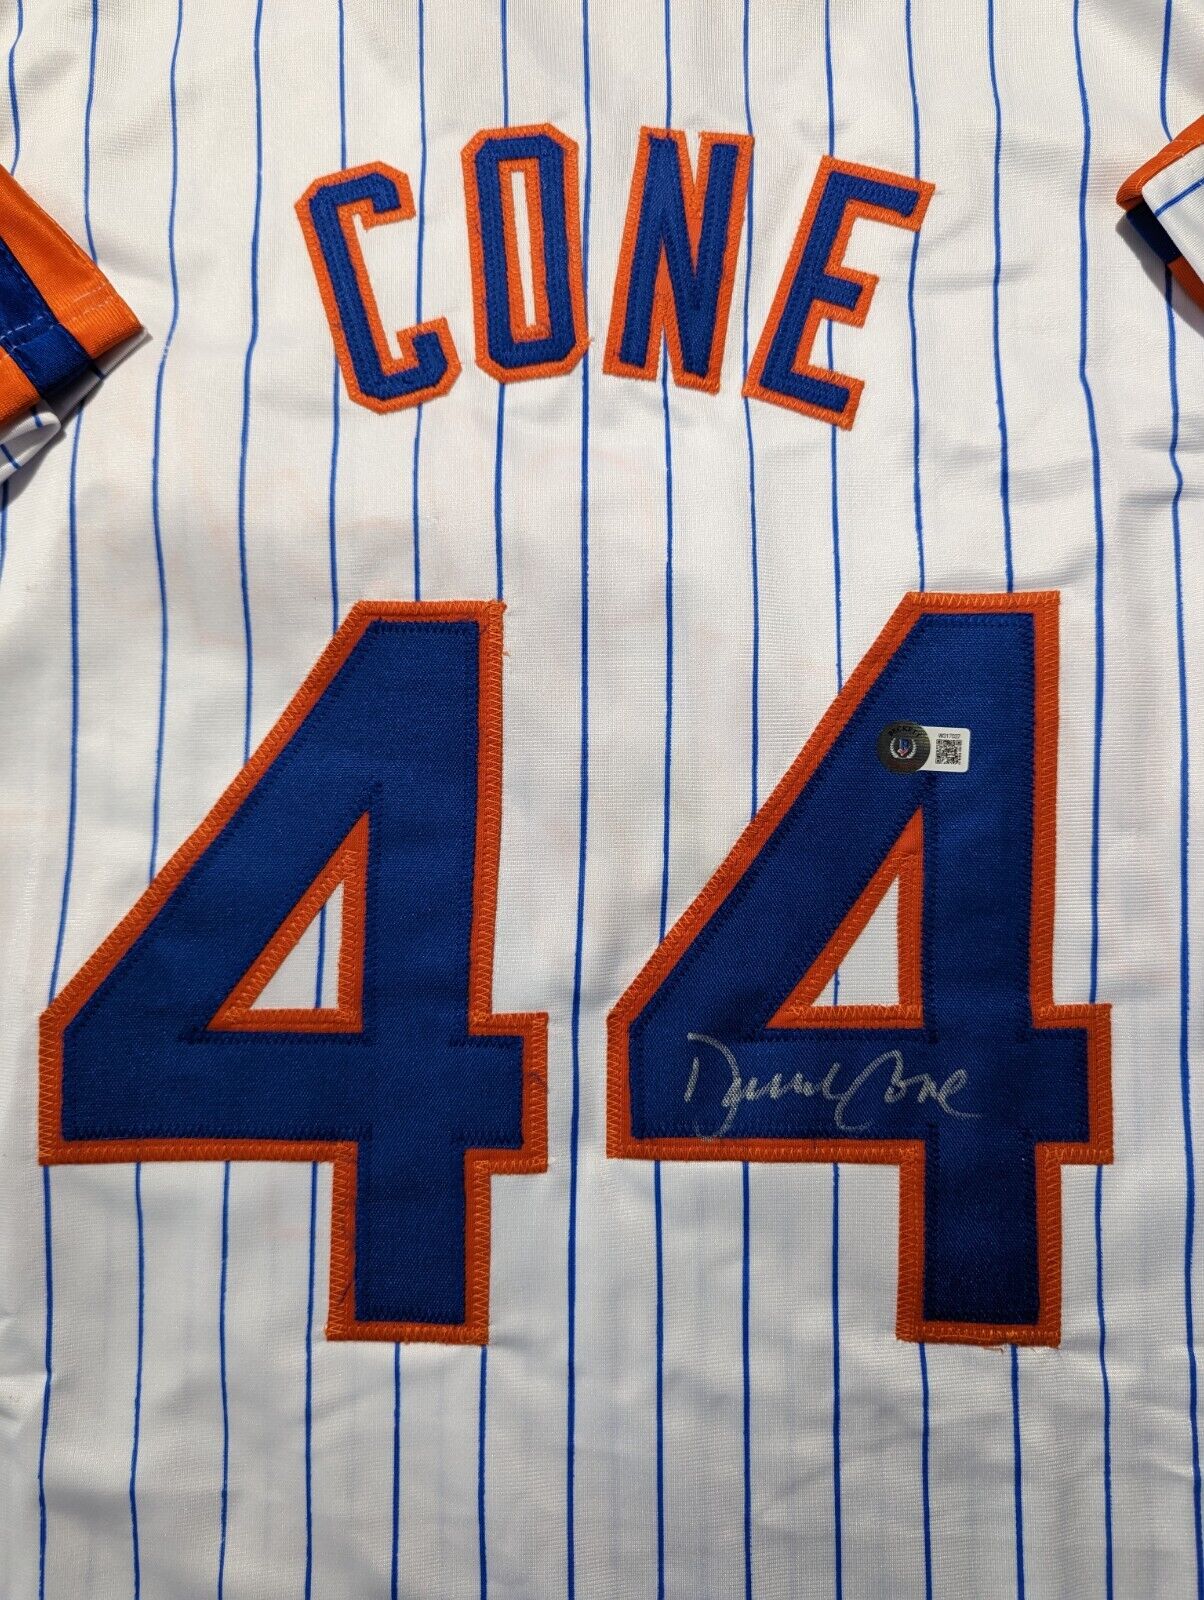 MVP Authentics New York Mets David Cone Autographed Signed Jersey Beckett Holo 99 sports jersey framing , jersey framing